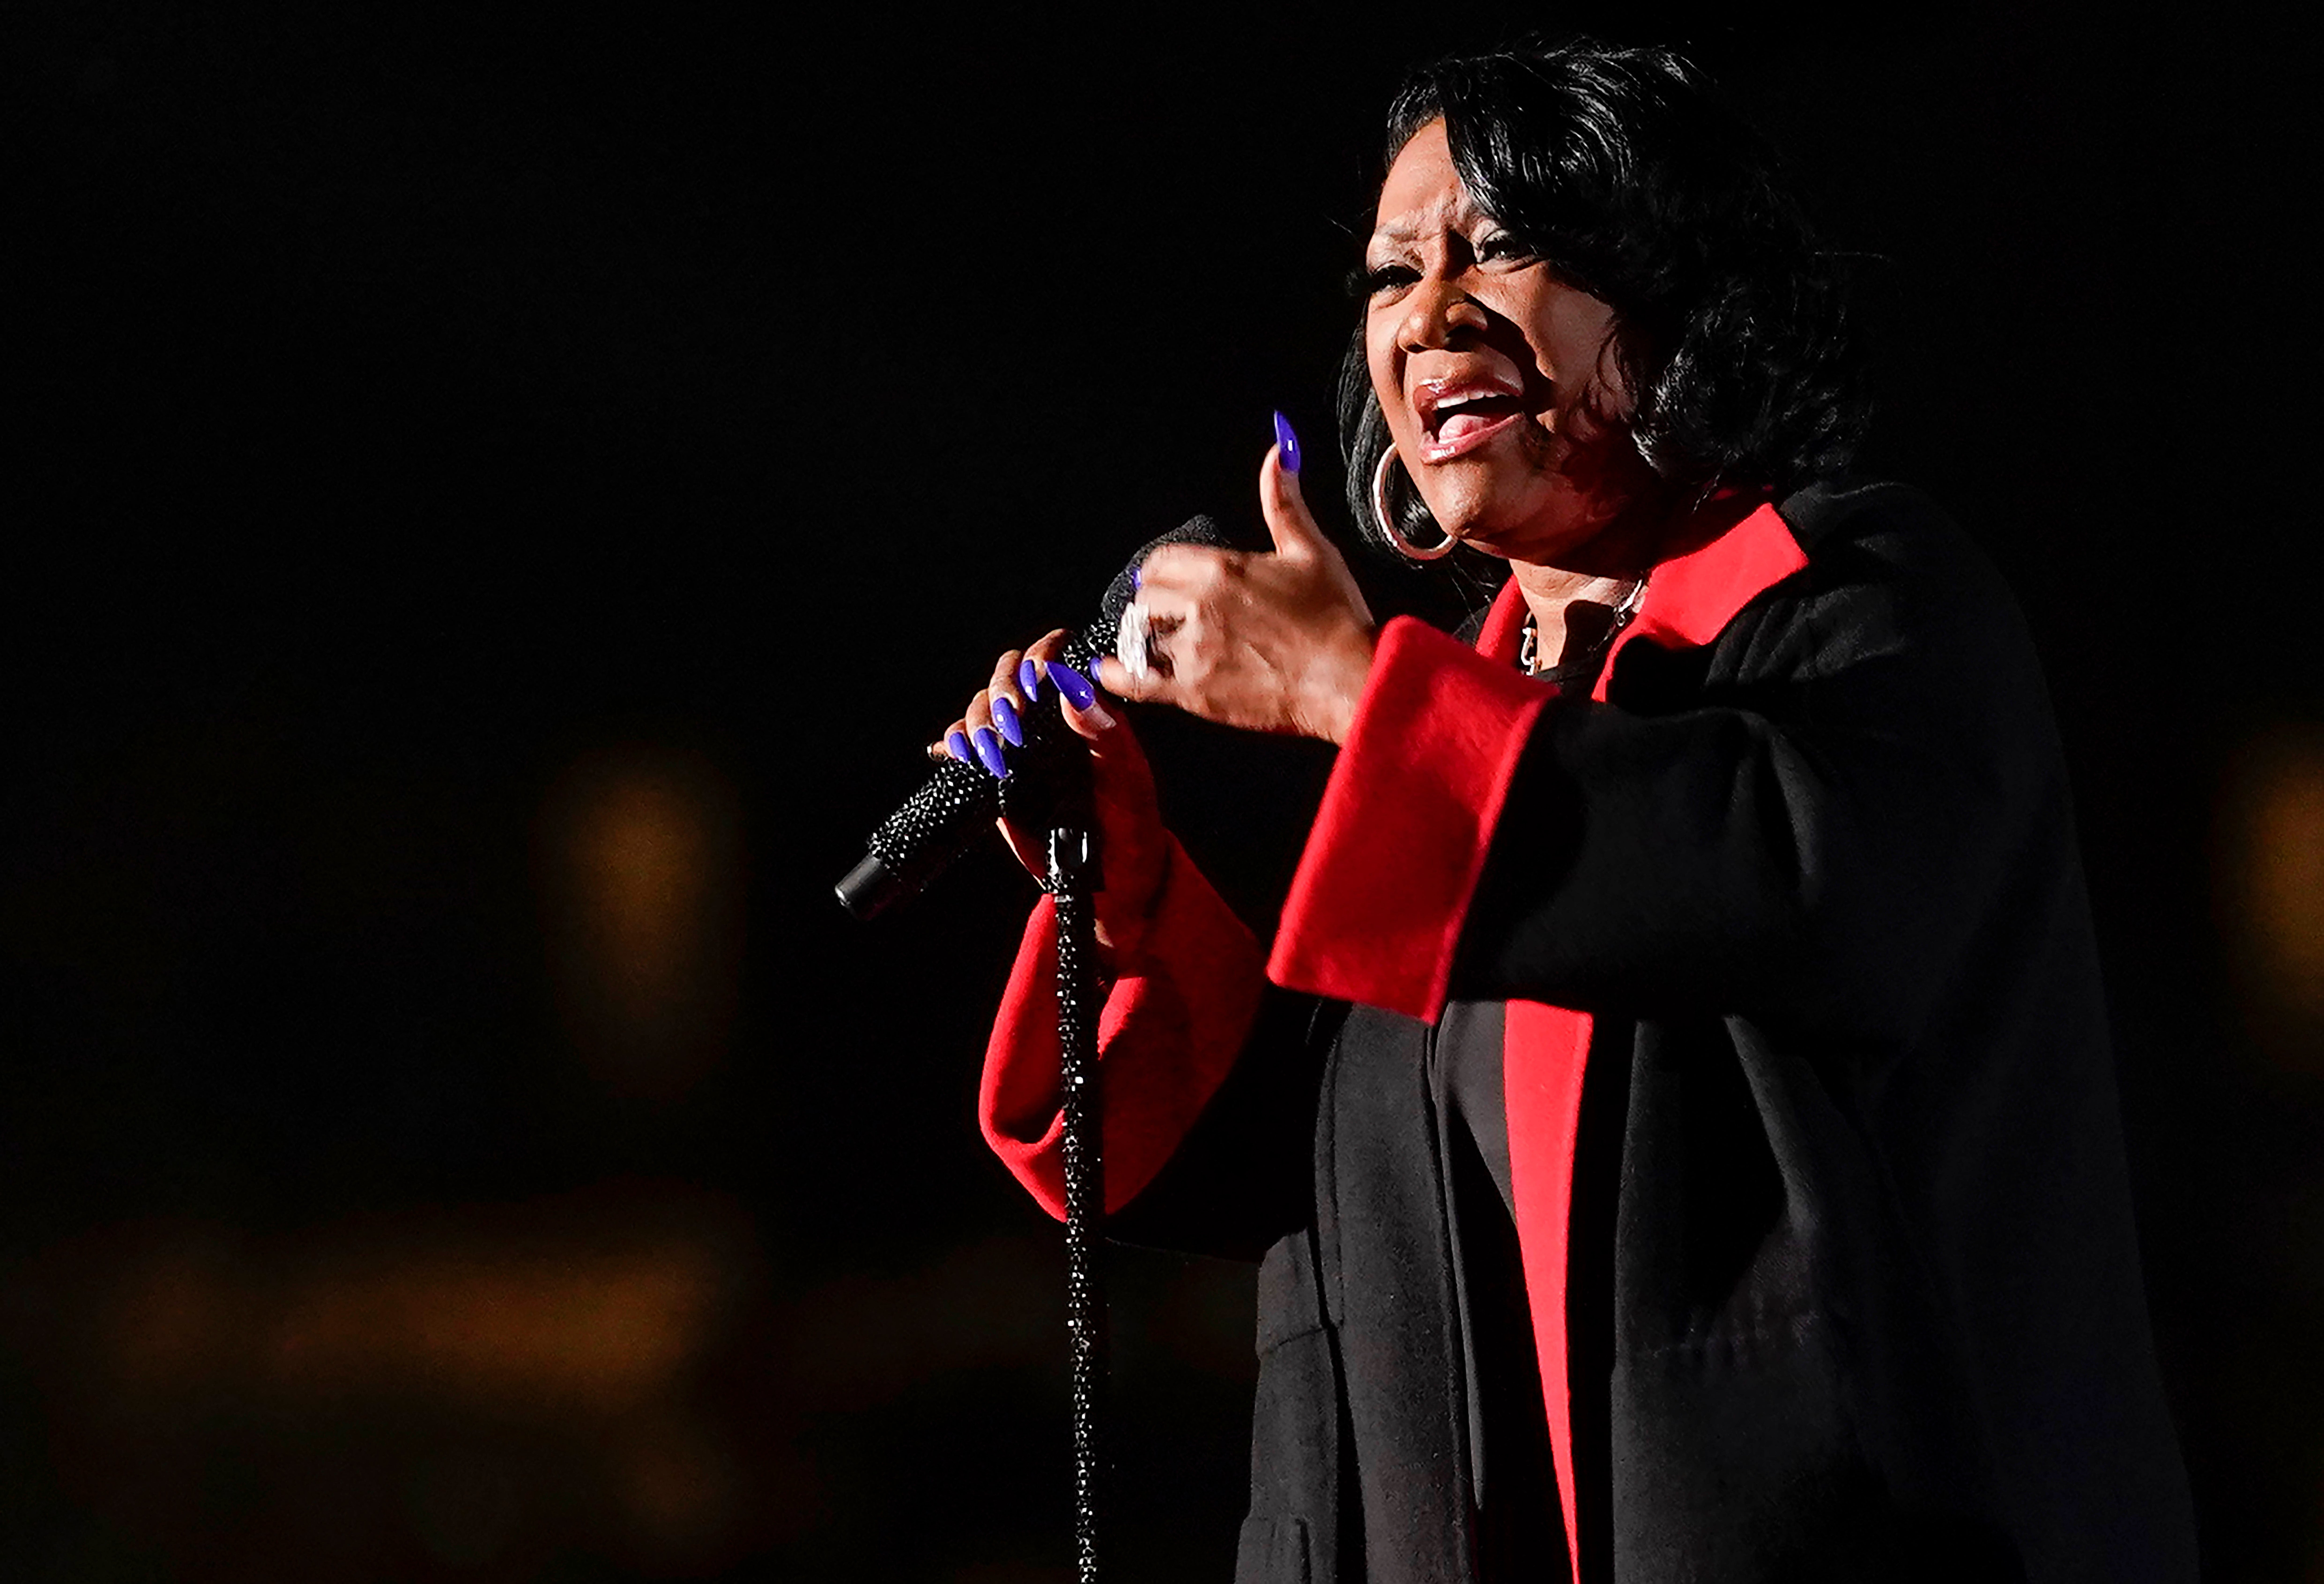 Patti LaBelle yet to issue a statement over the incident